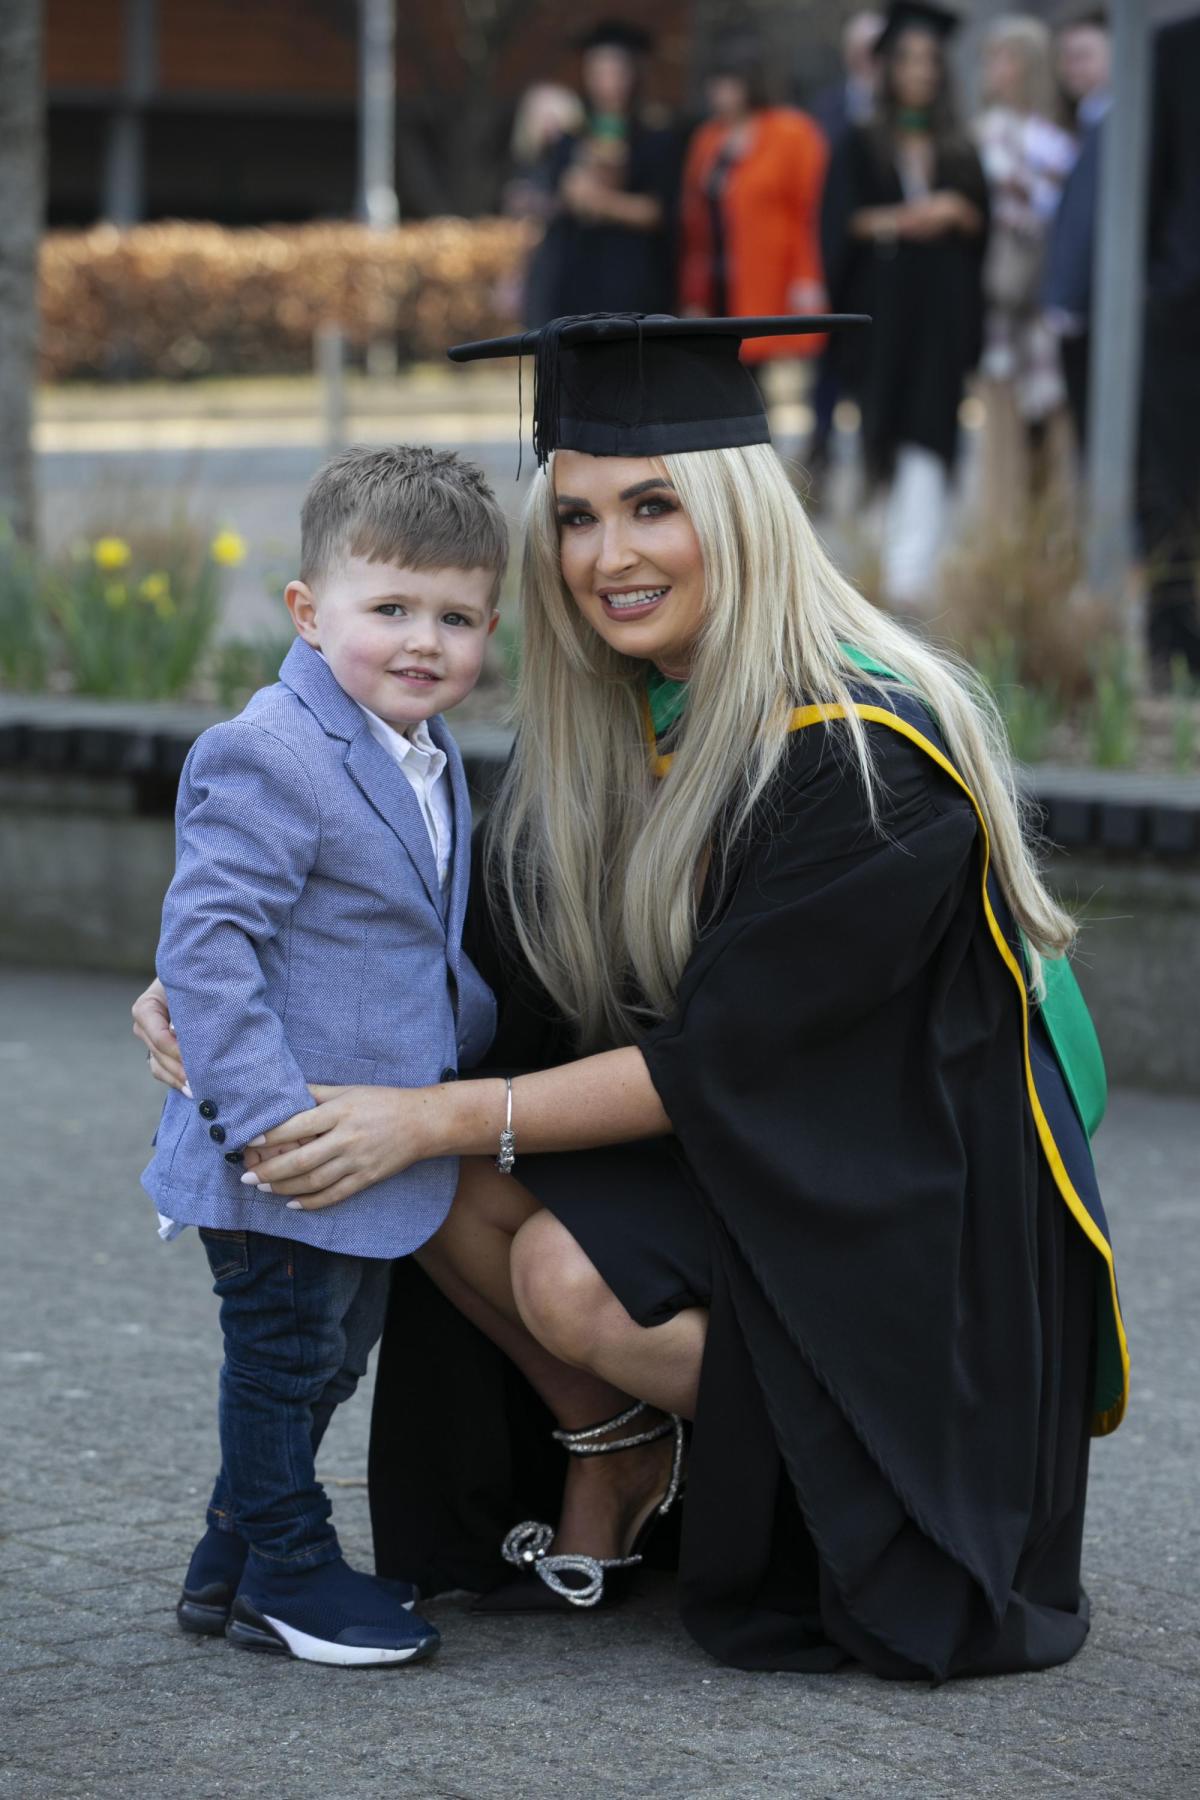 Stephanie Collins, graduating with a degree in Intellectual Disability Nursing